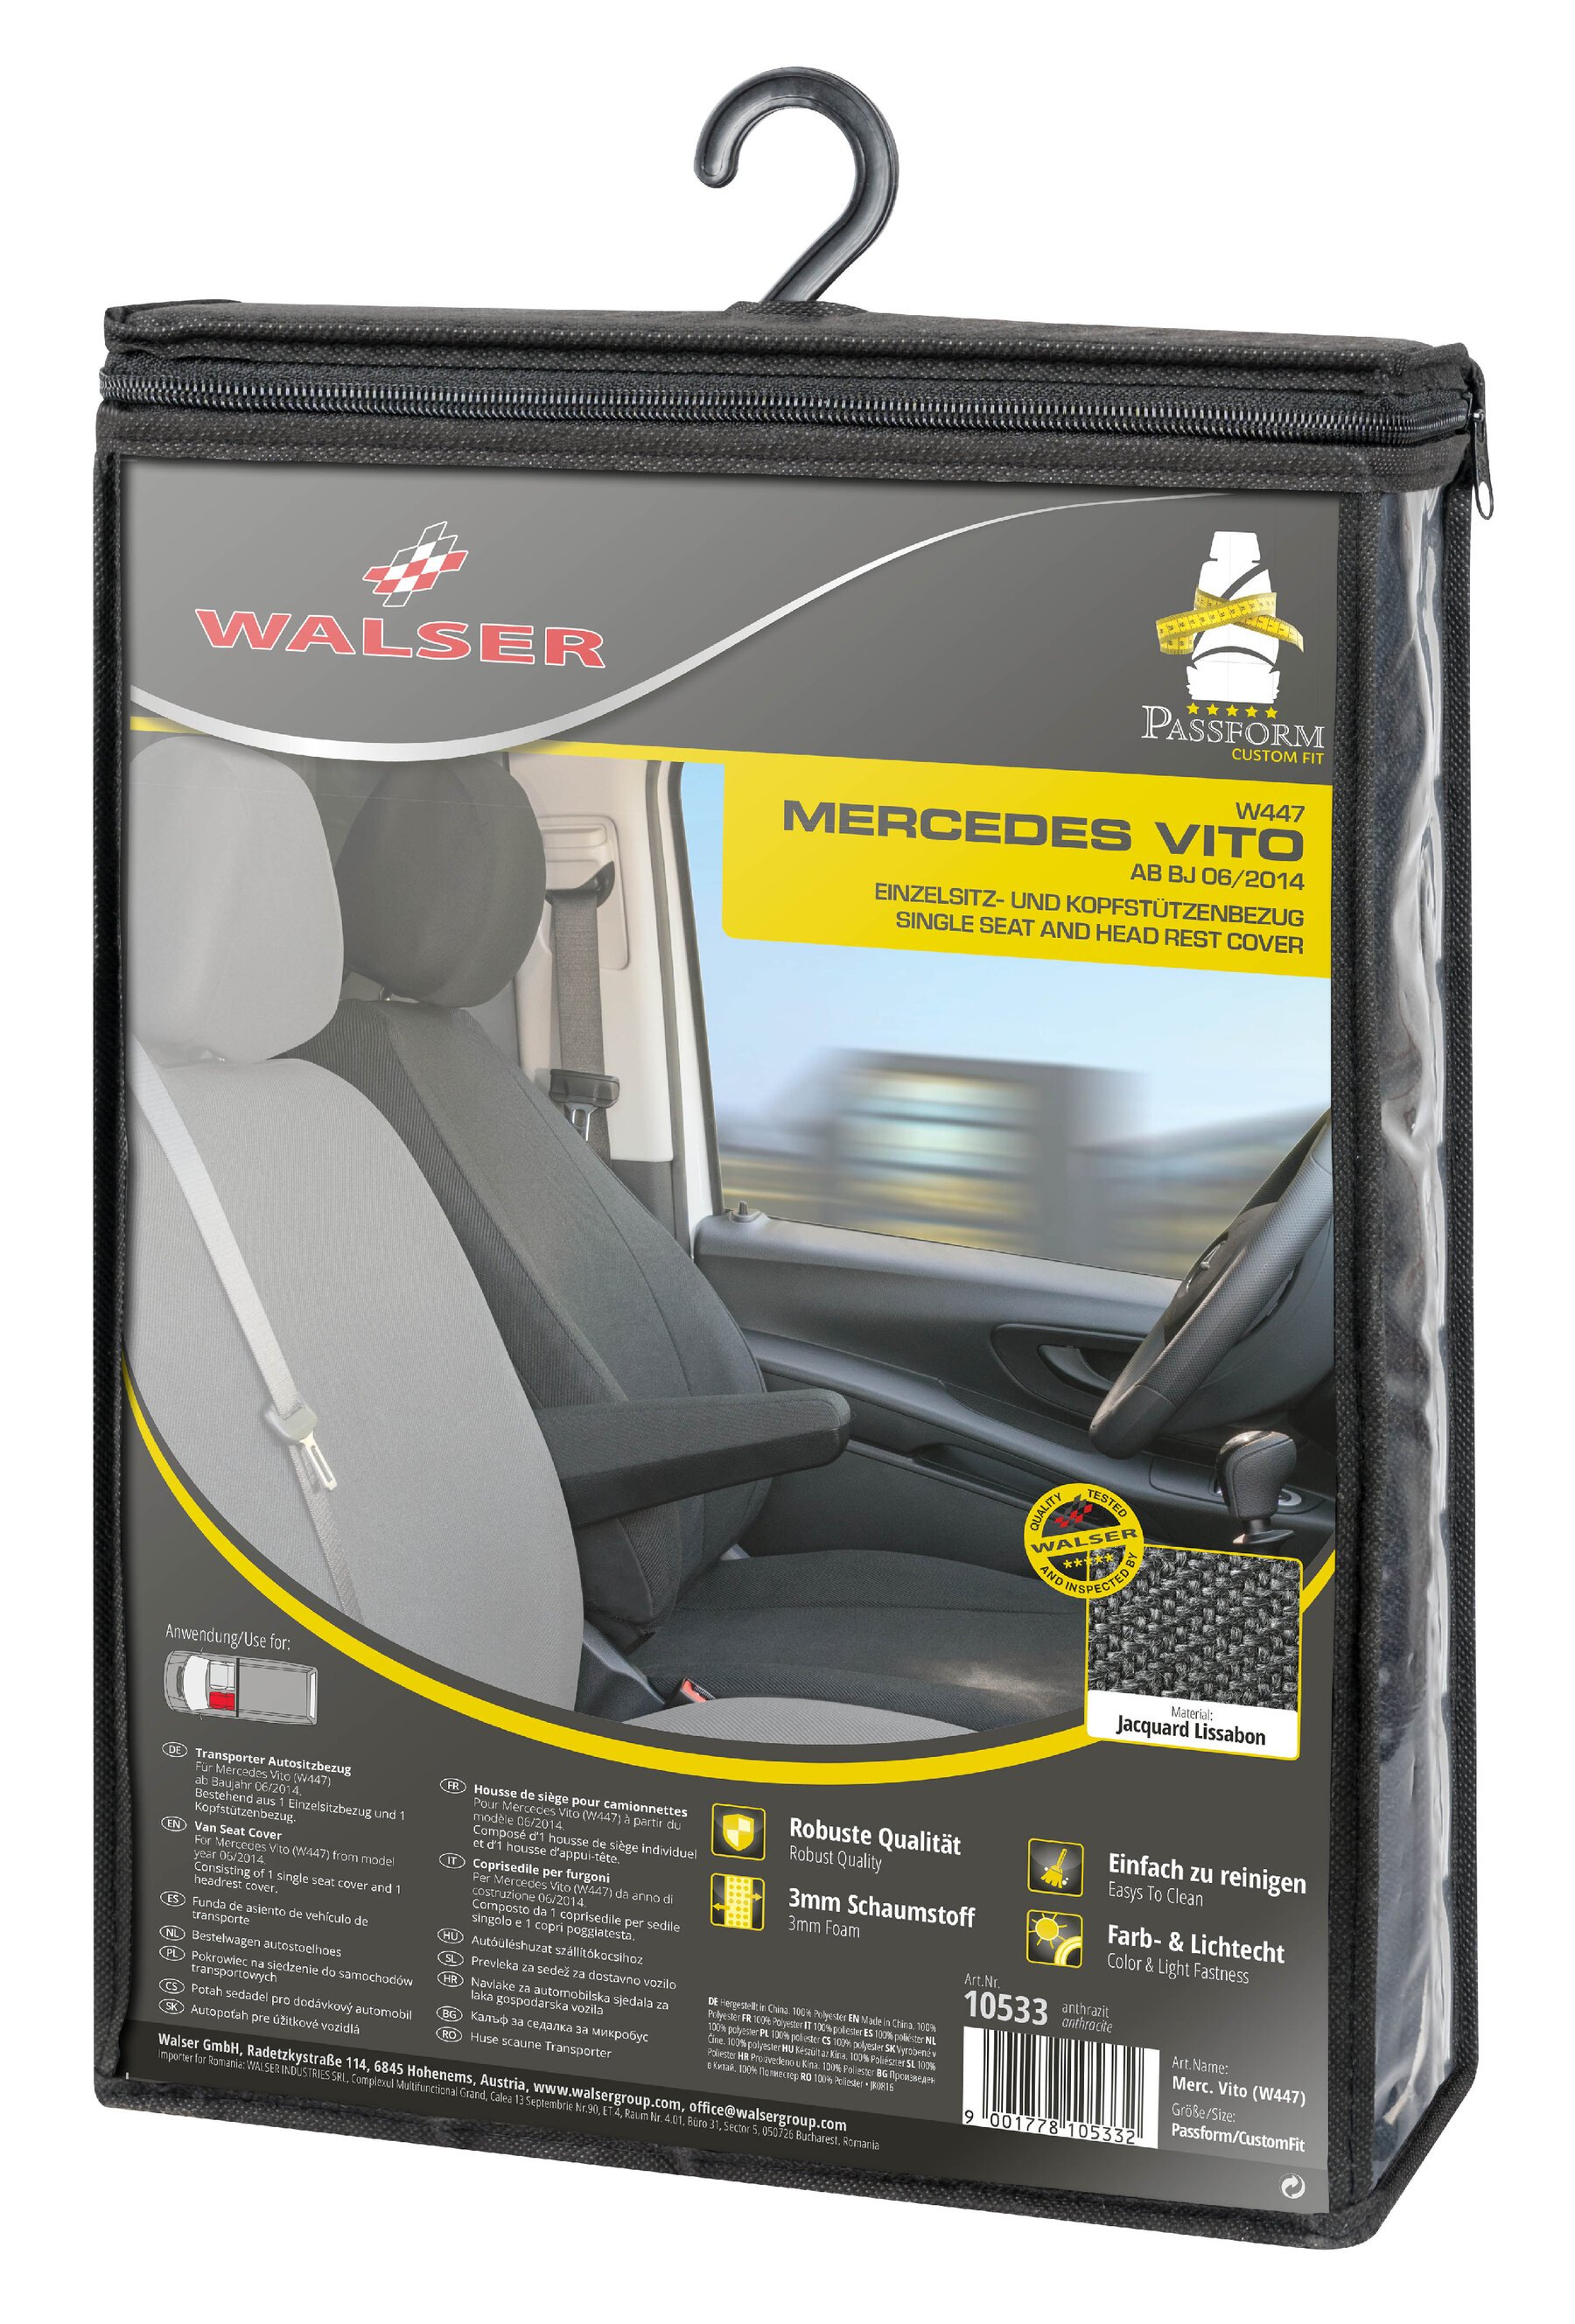 Car Seat cover Transporter made of fabric for Mercedes Vito 447, single seat with armrest inside